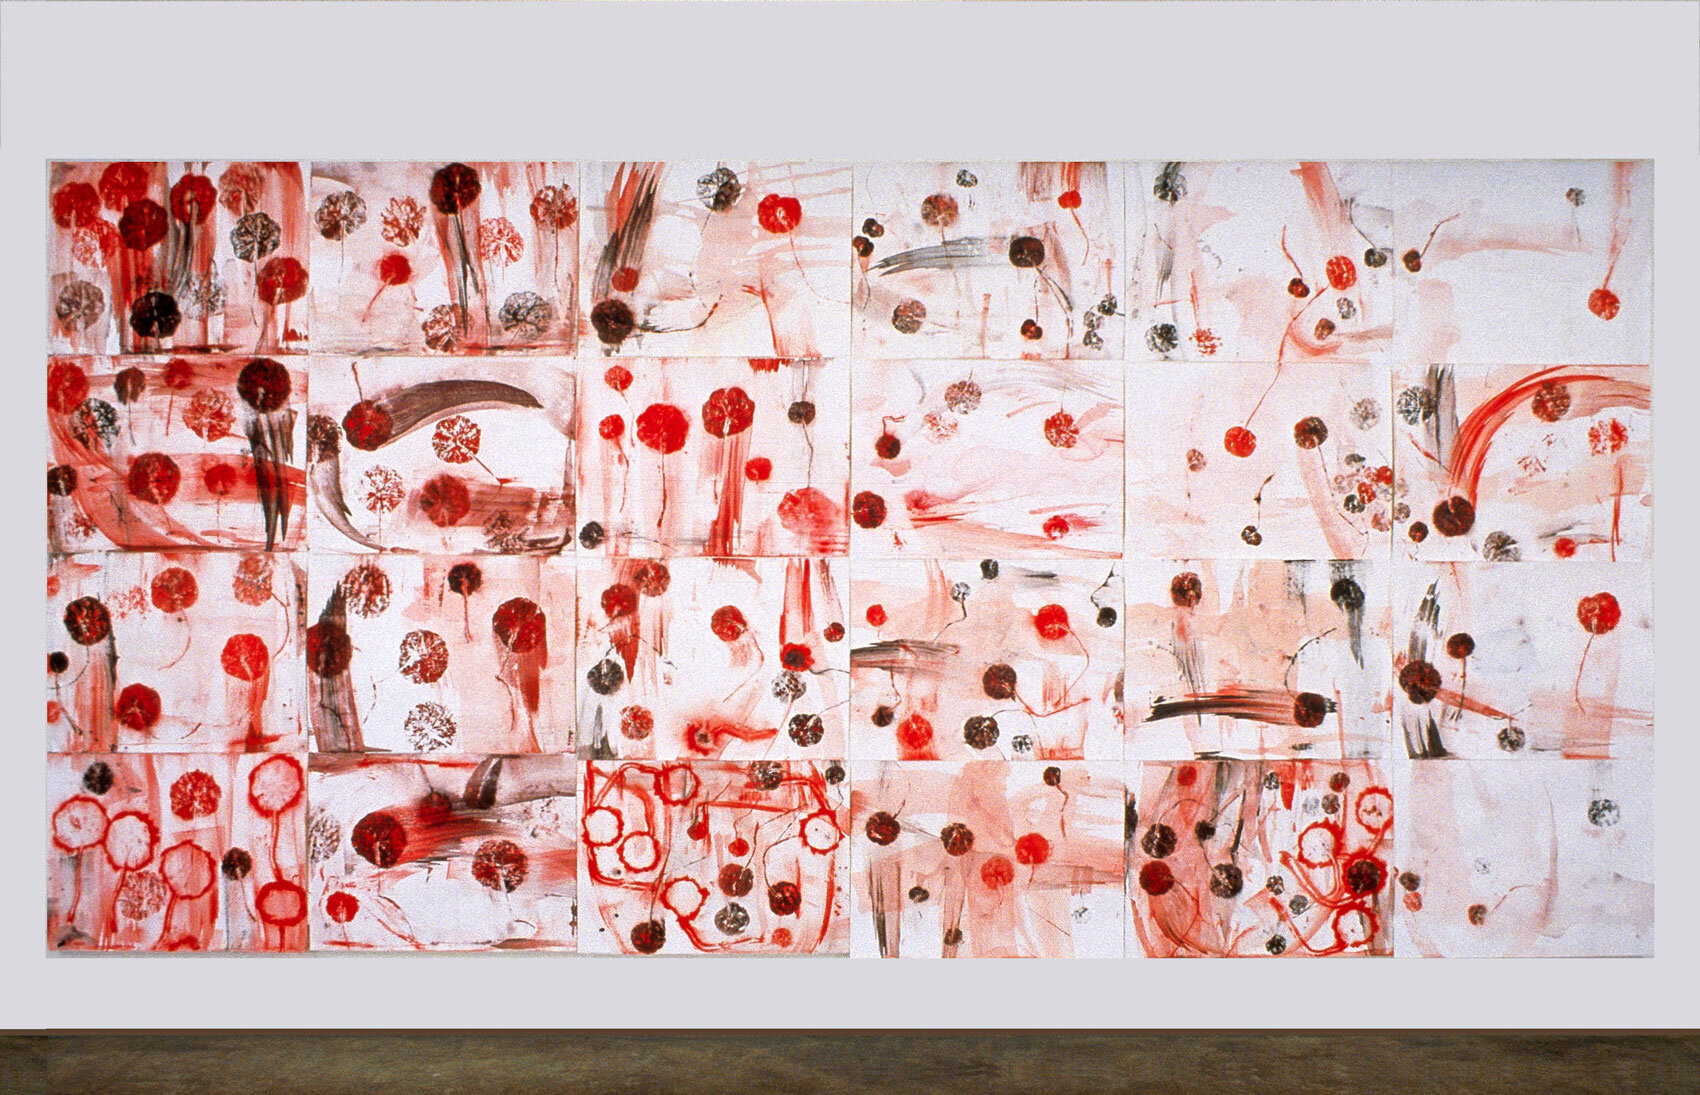   Red Nasturtium Series , 2002, acrylic on paper, 88 x 210 inches 